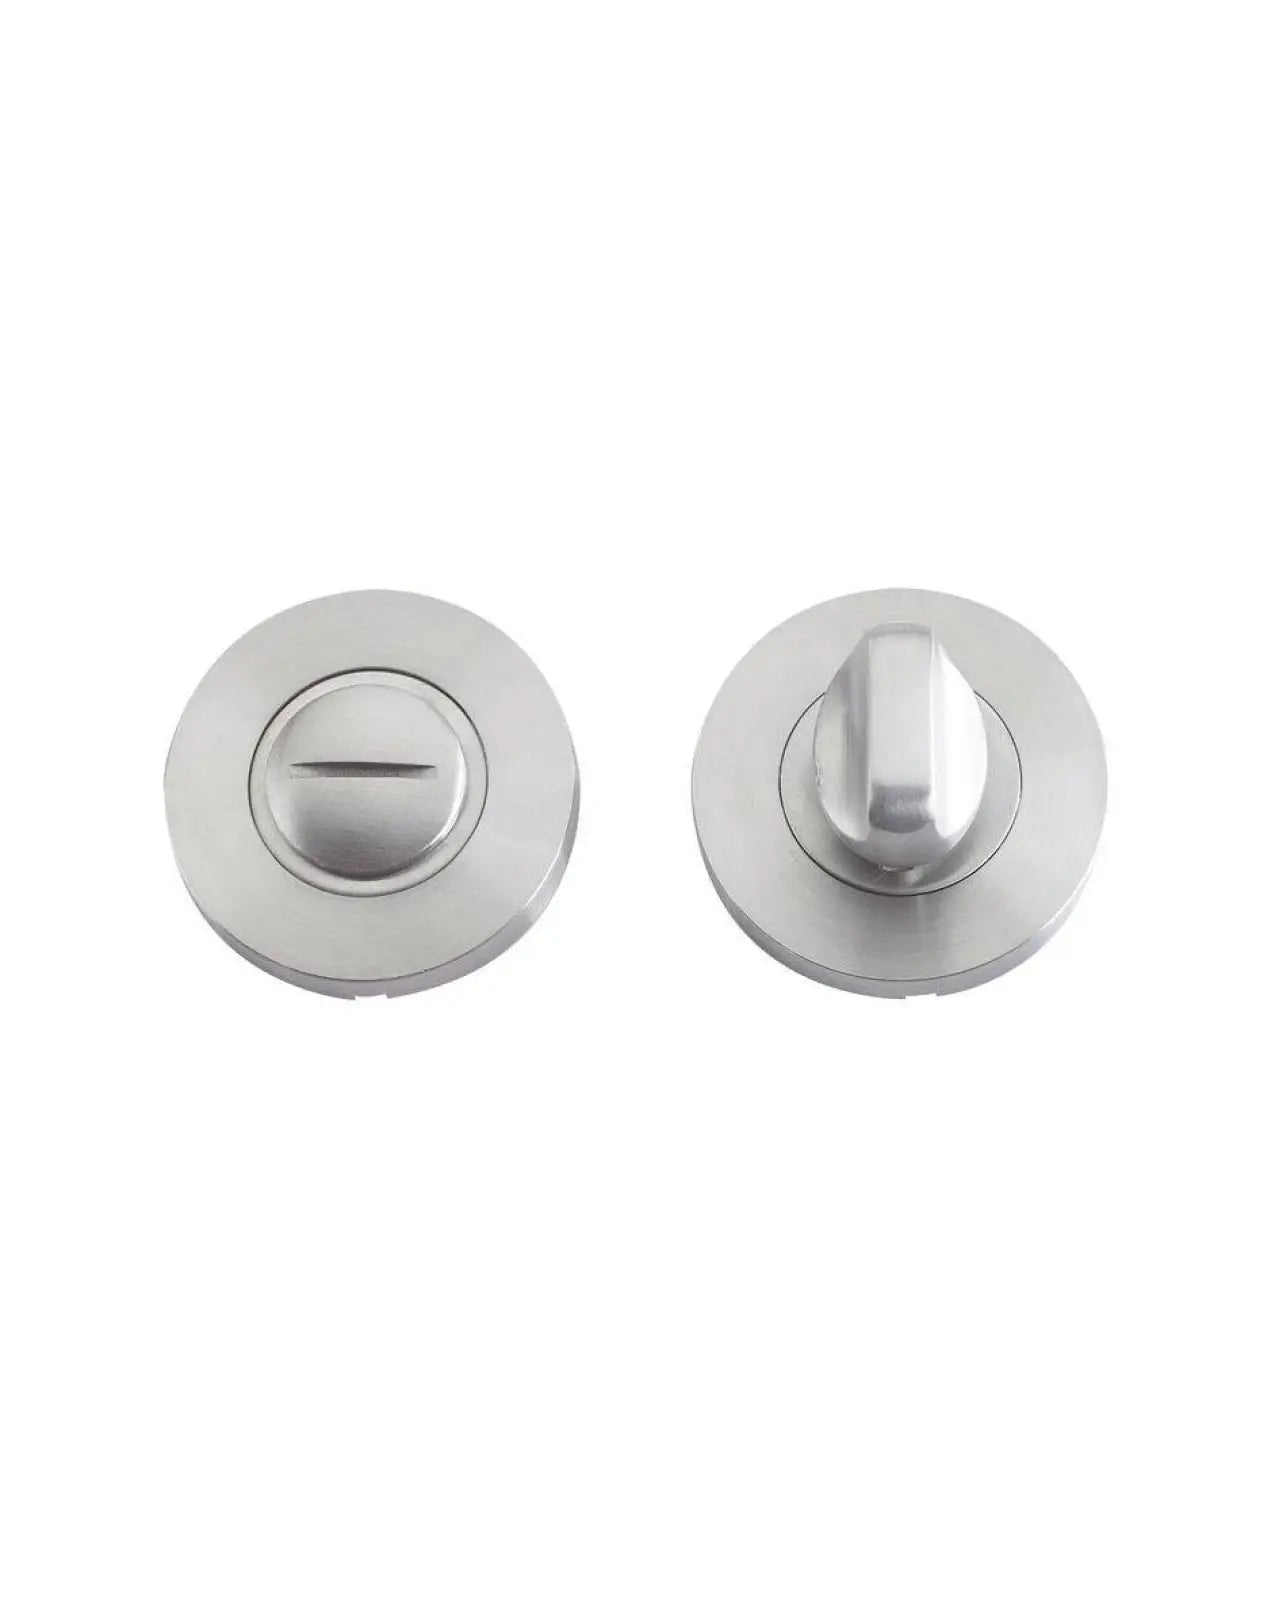 Satin Stainless Bathroom Thumb Turn and Release - Decor And Decor